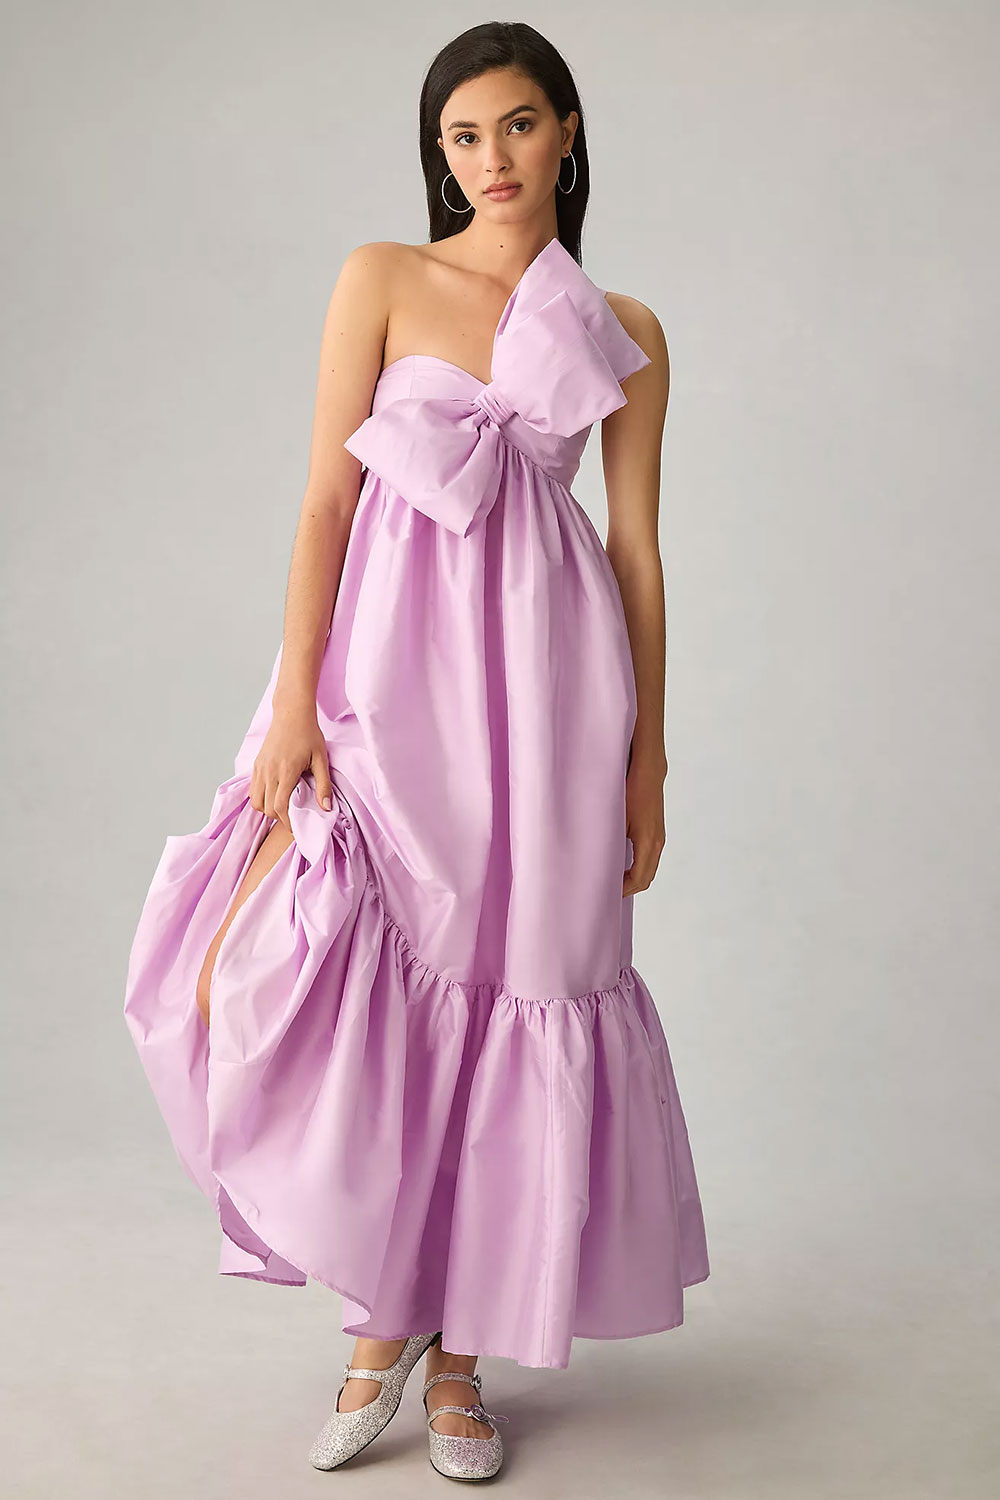 Pink bow Barbie aesthetic dress from Anthropologie